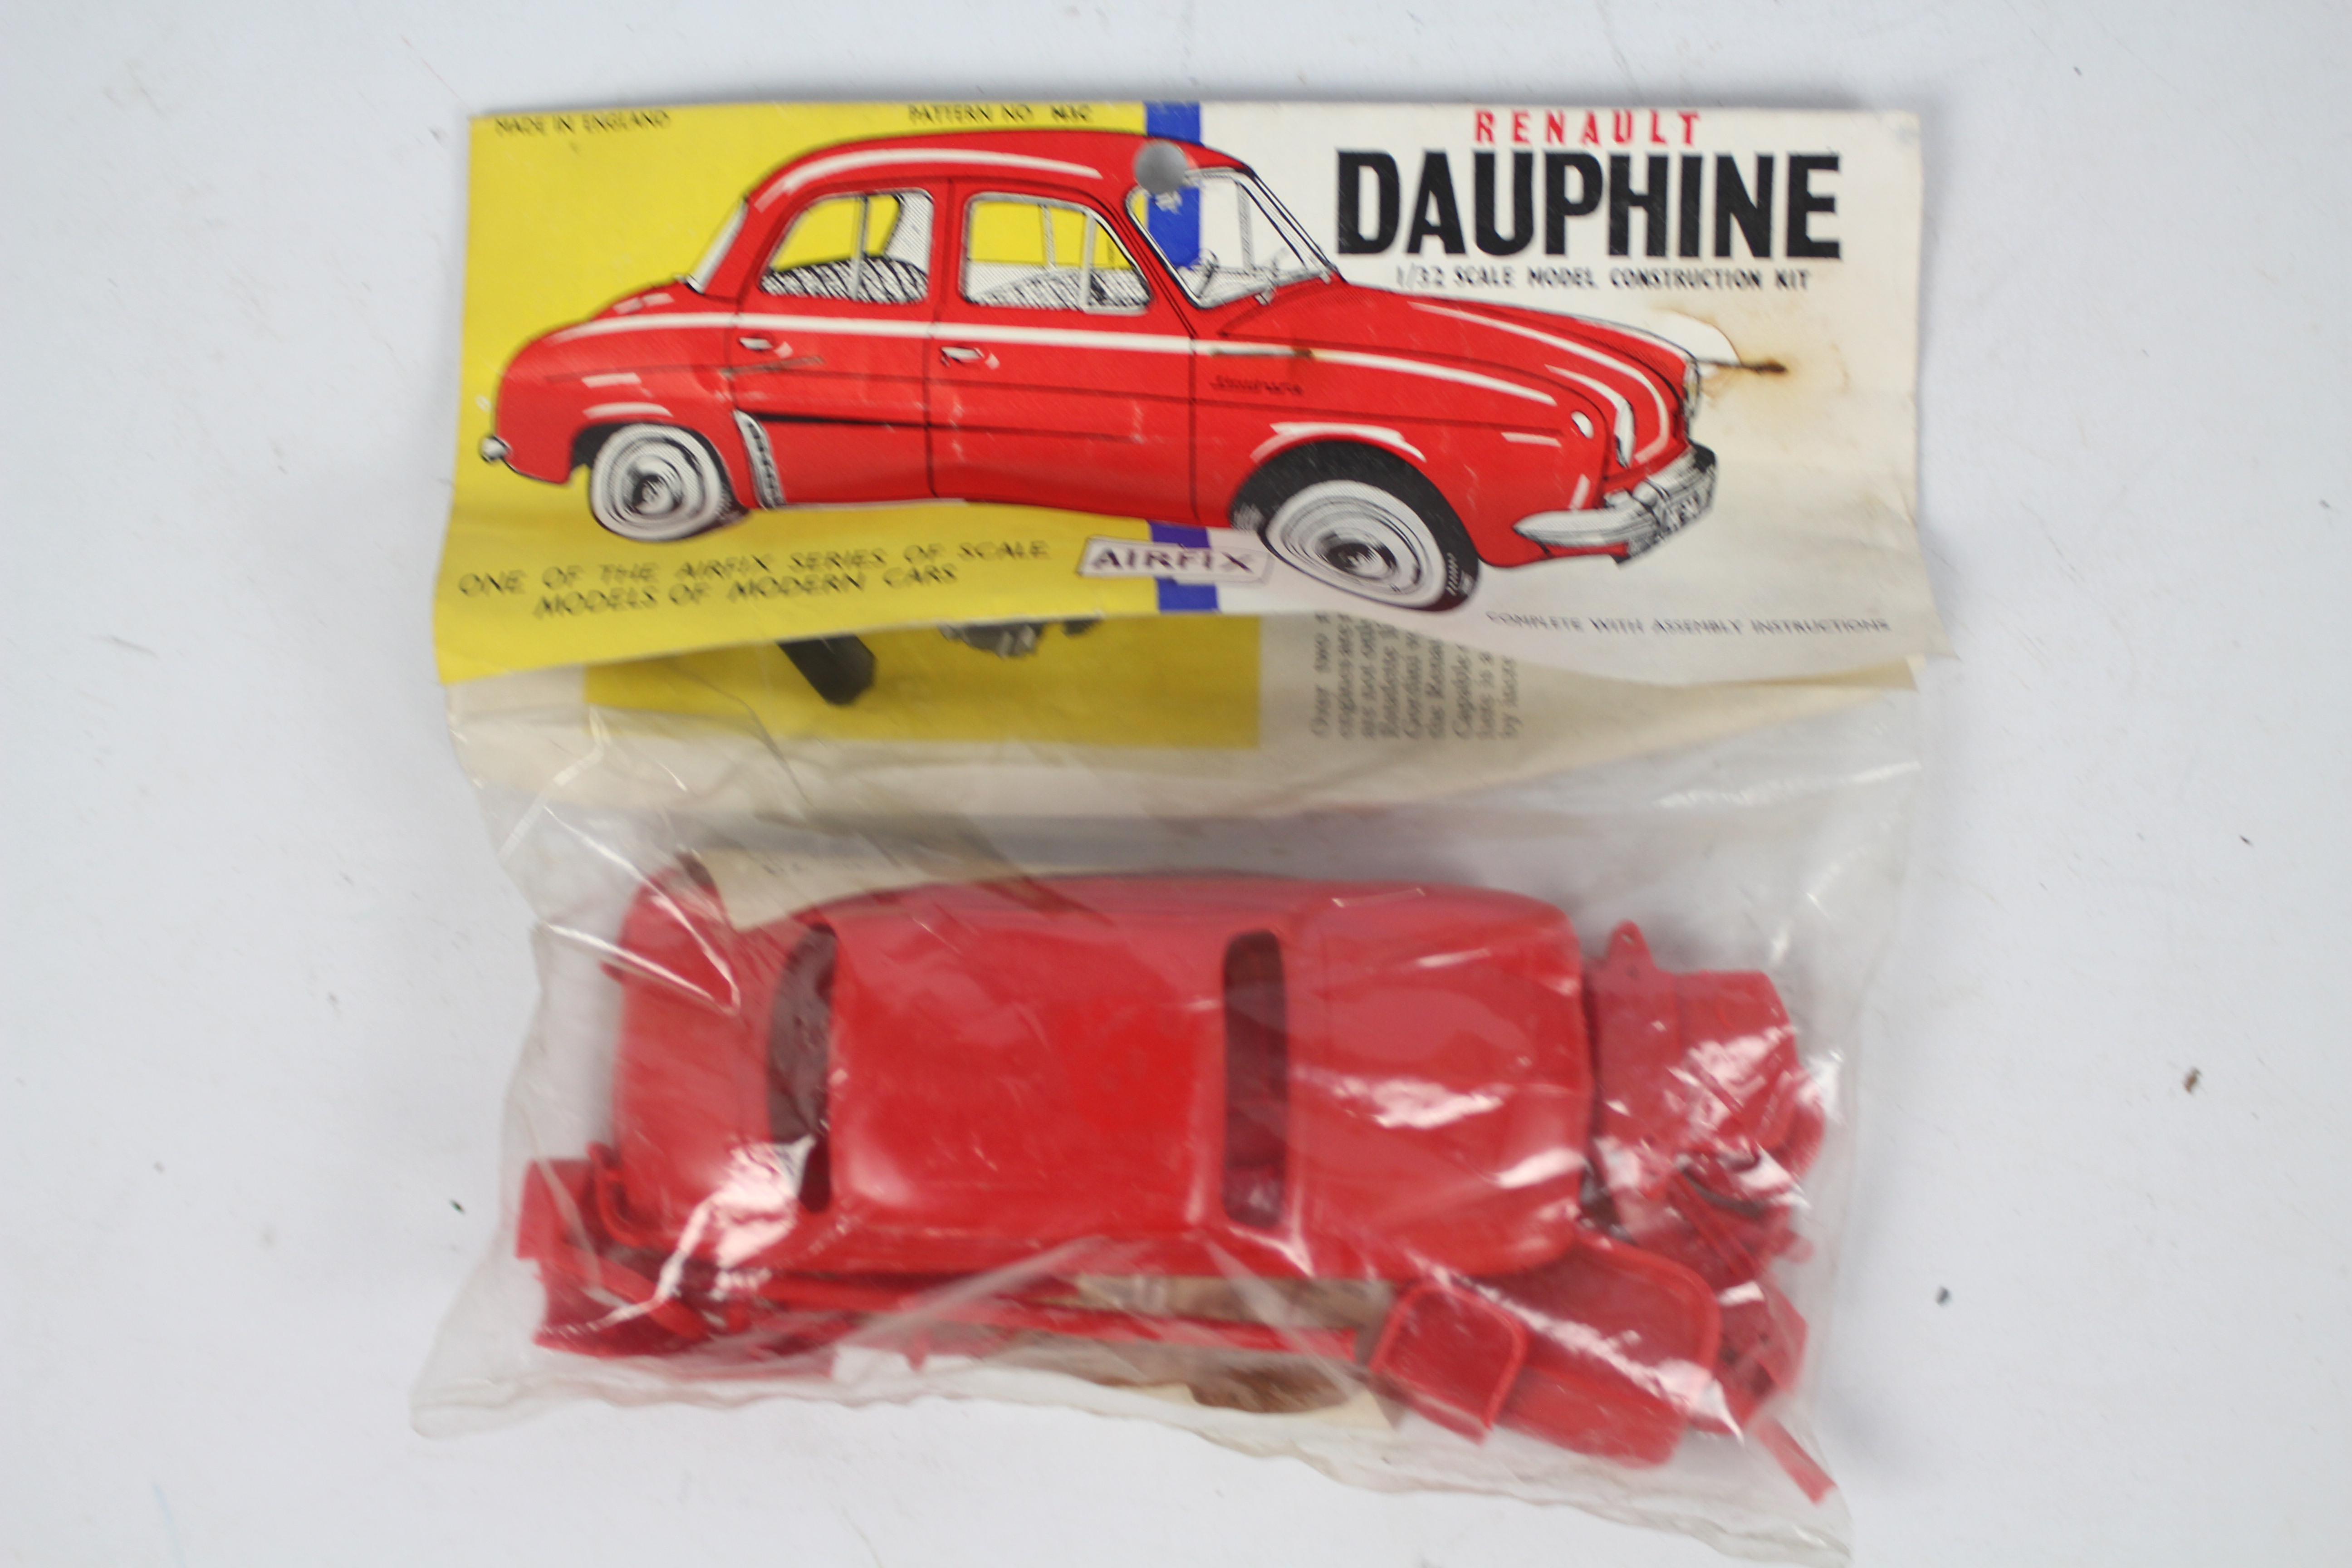 Airfix - Revell - 6 x unmade car model kits including rare Renault Dauphine # M3C, - Image 7 of 7